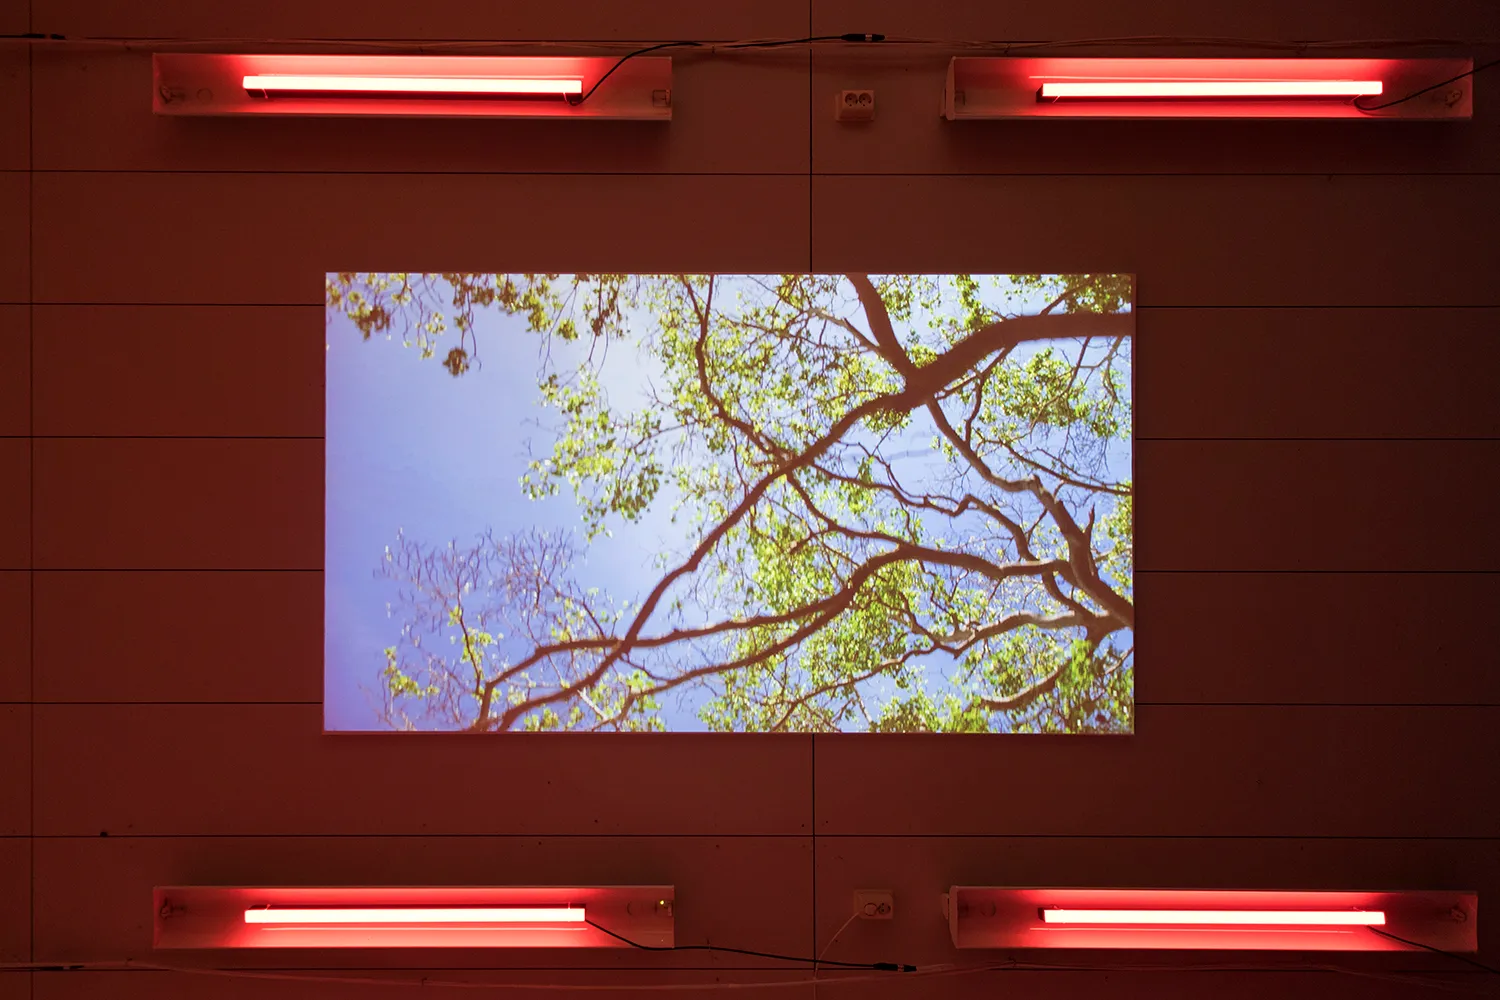 The projection of an image of a canopy onto a ceiling, with 4 red neon lighttubes around